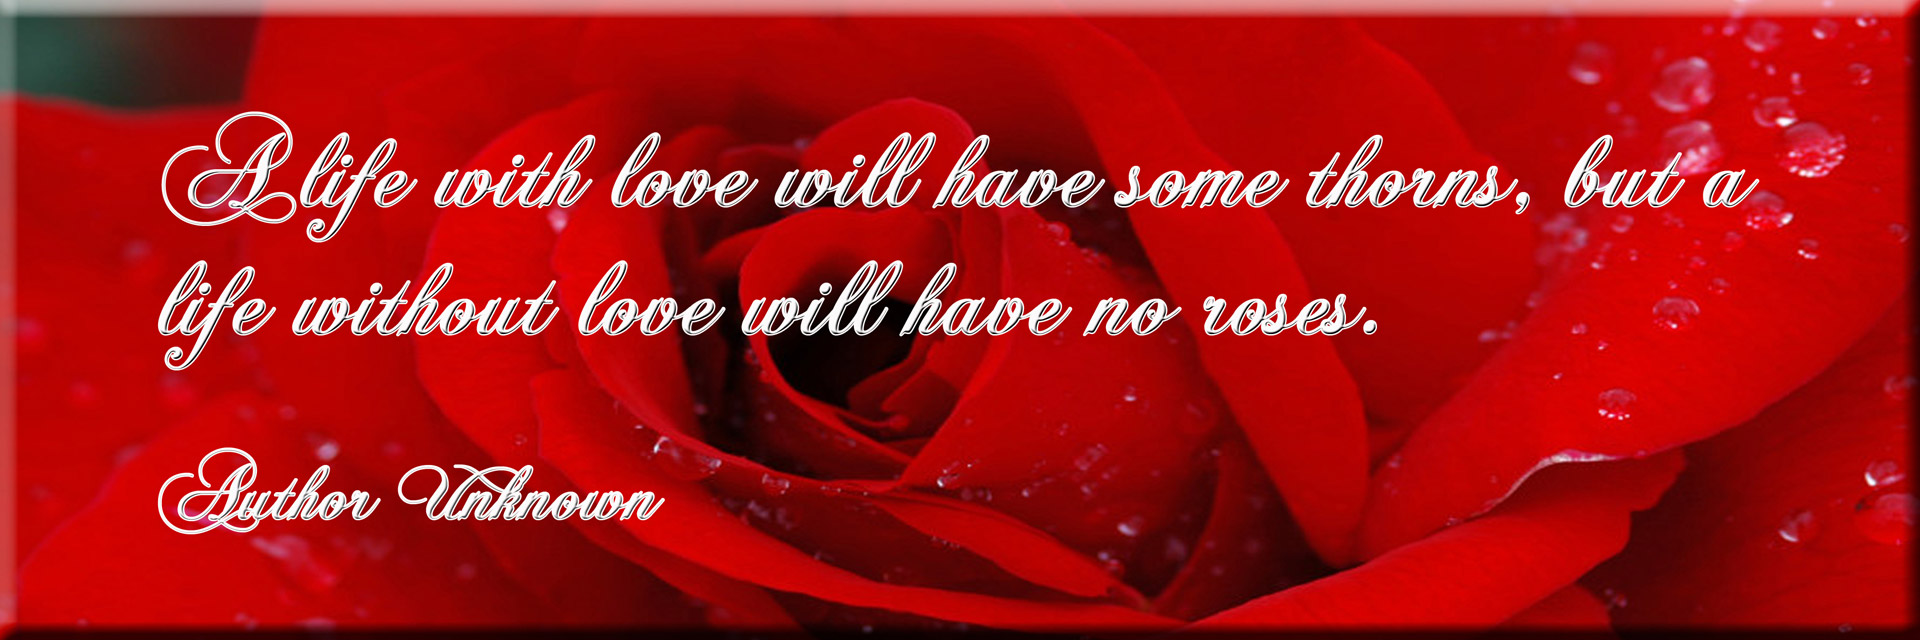 red rose quote life free photo